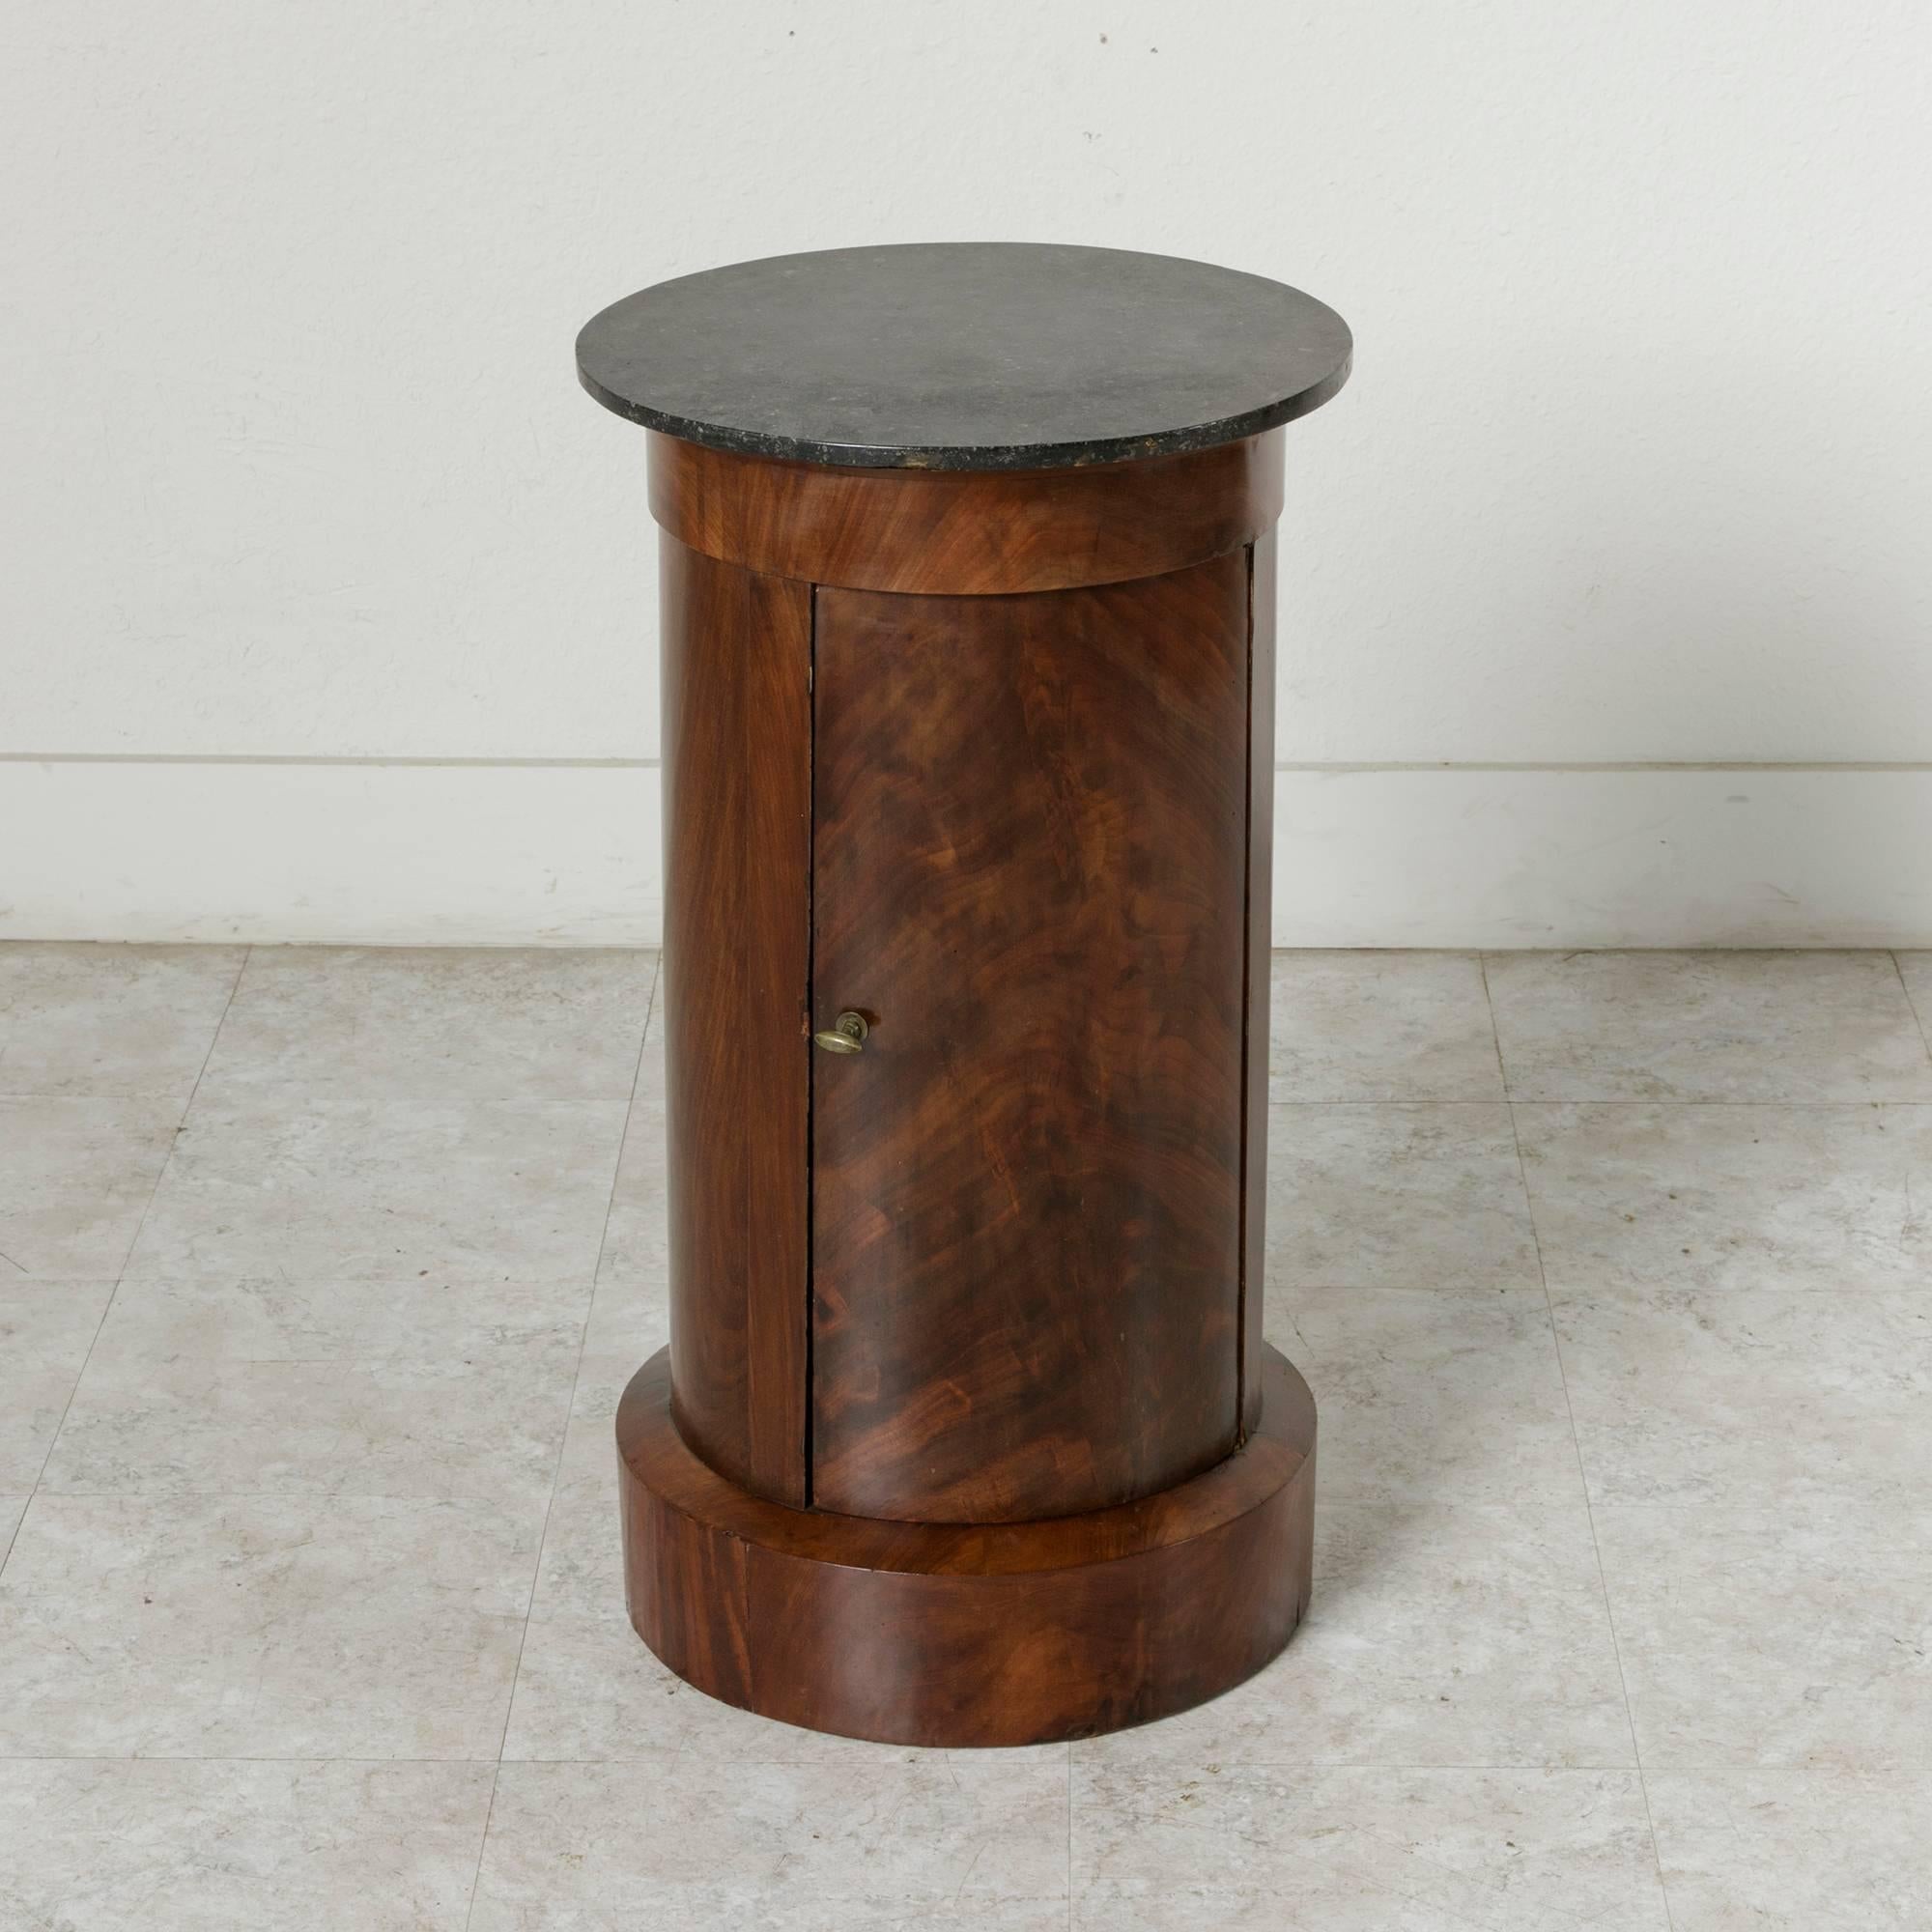 This stunning French Empire period mahogany somneau or drum table features a black marble top and hinged curved door. Its cylindrical form and clean lines lend a refined yet modern character. Its interior includes a marble shelf and provides the